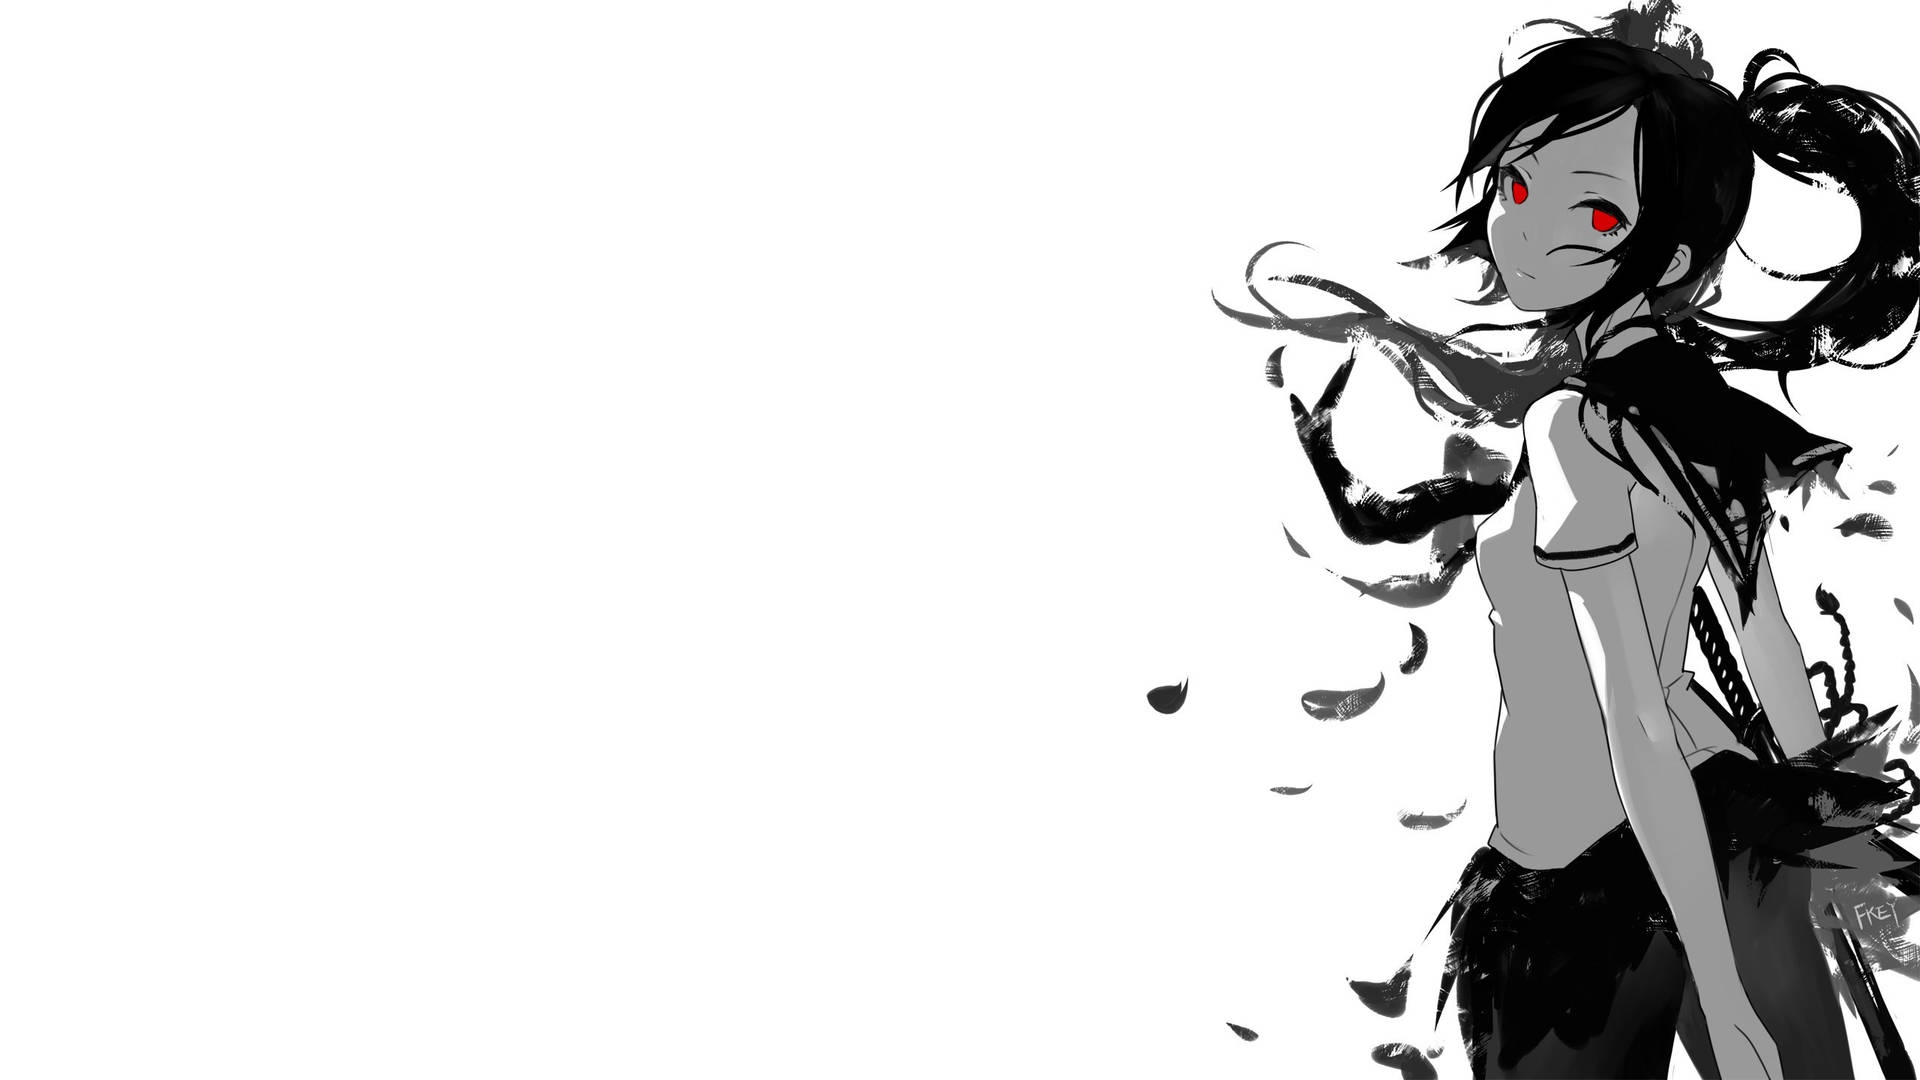 Football Black And White Anime Background Wallpaper Image For Free Download  - Pngtree